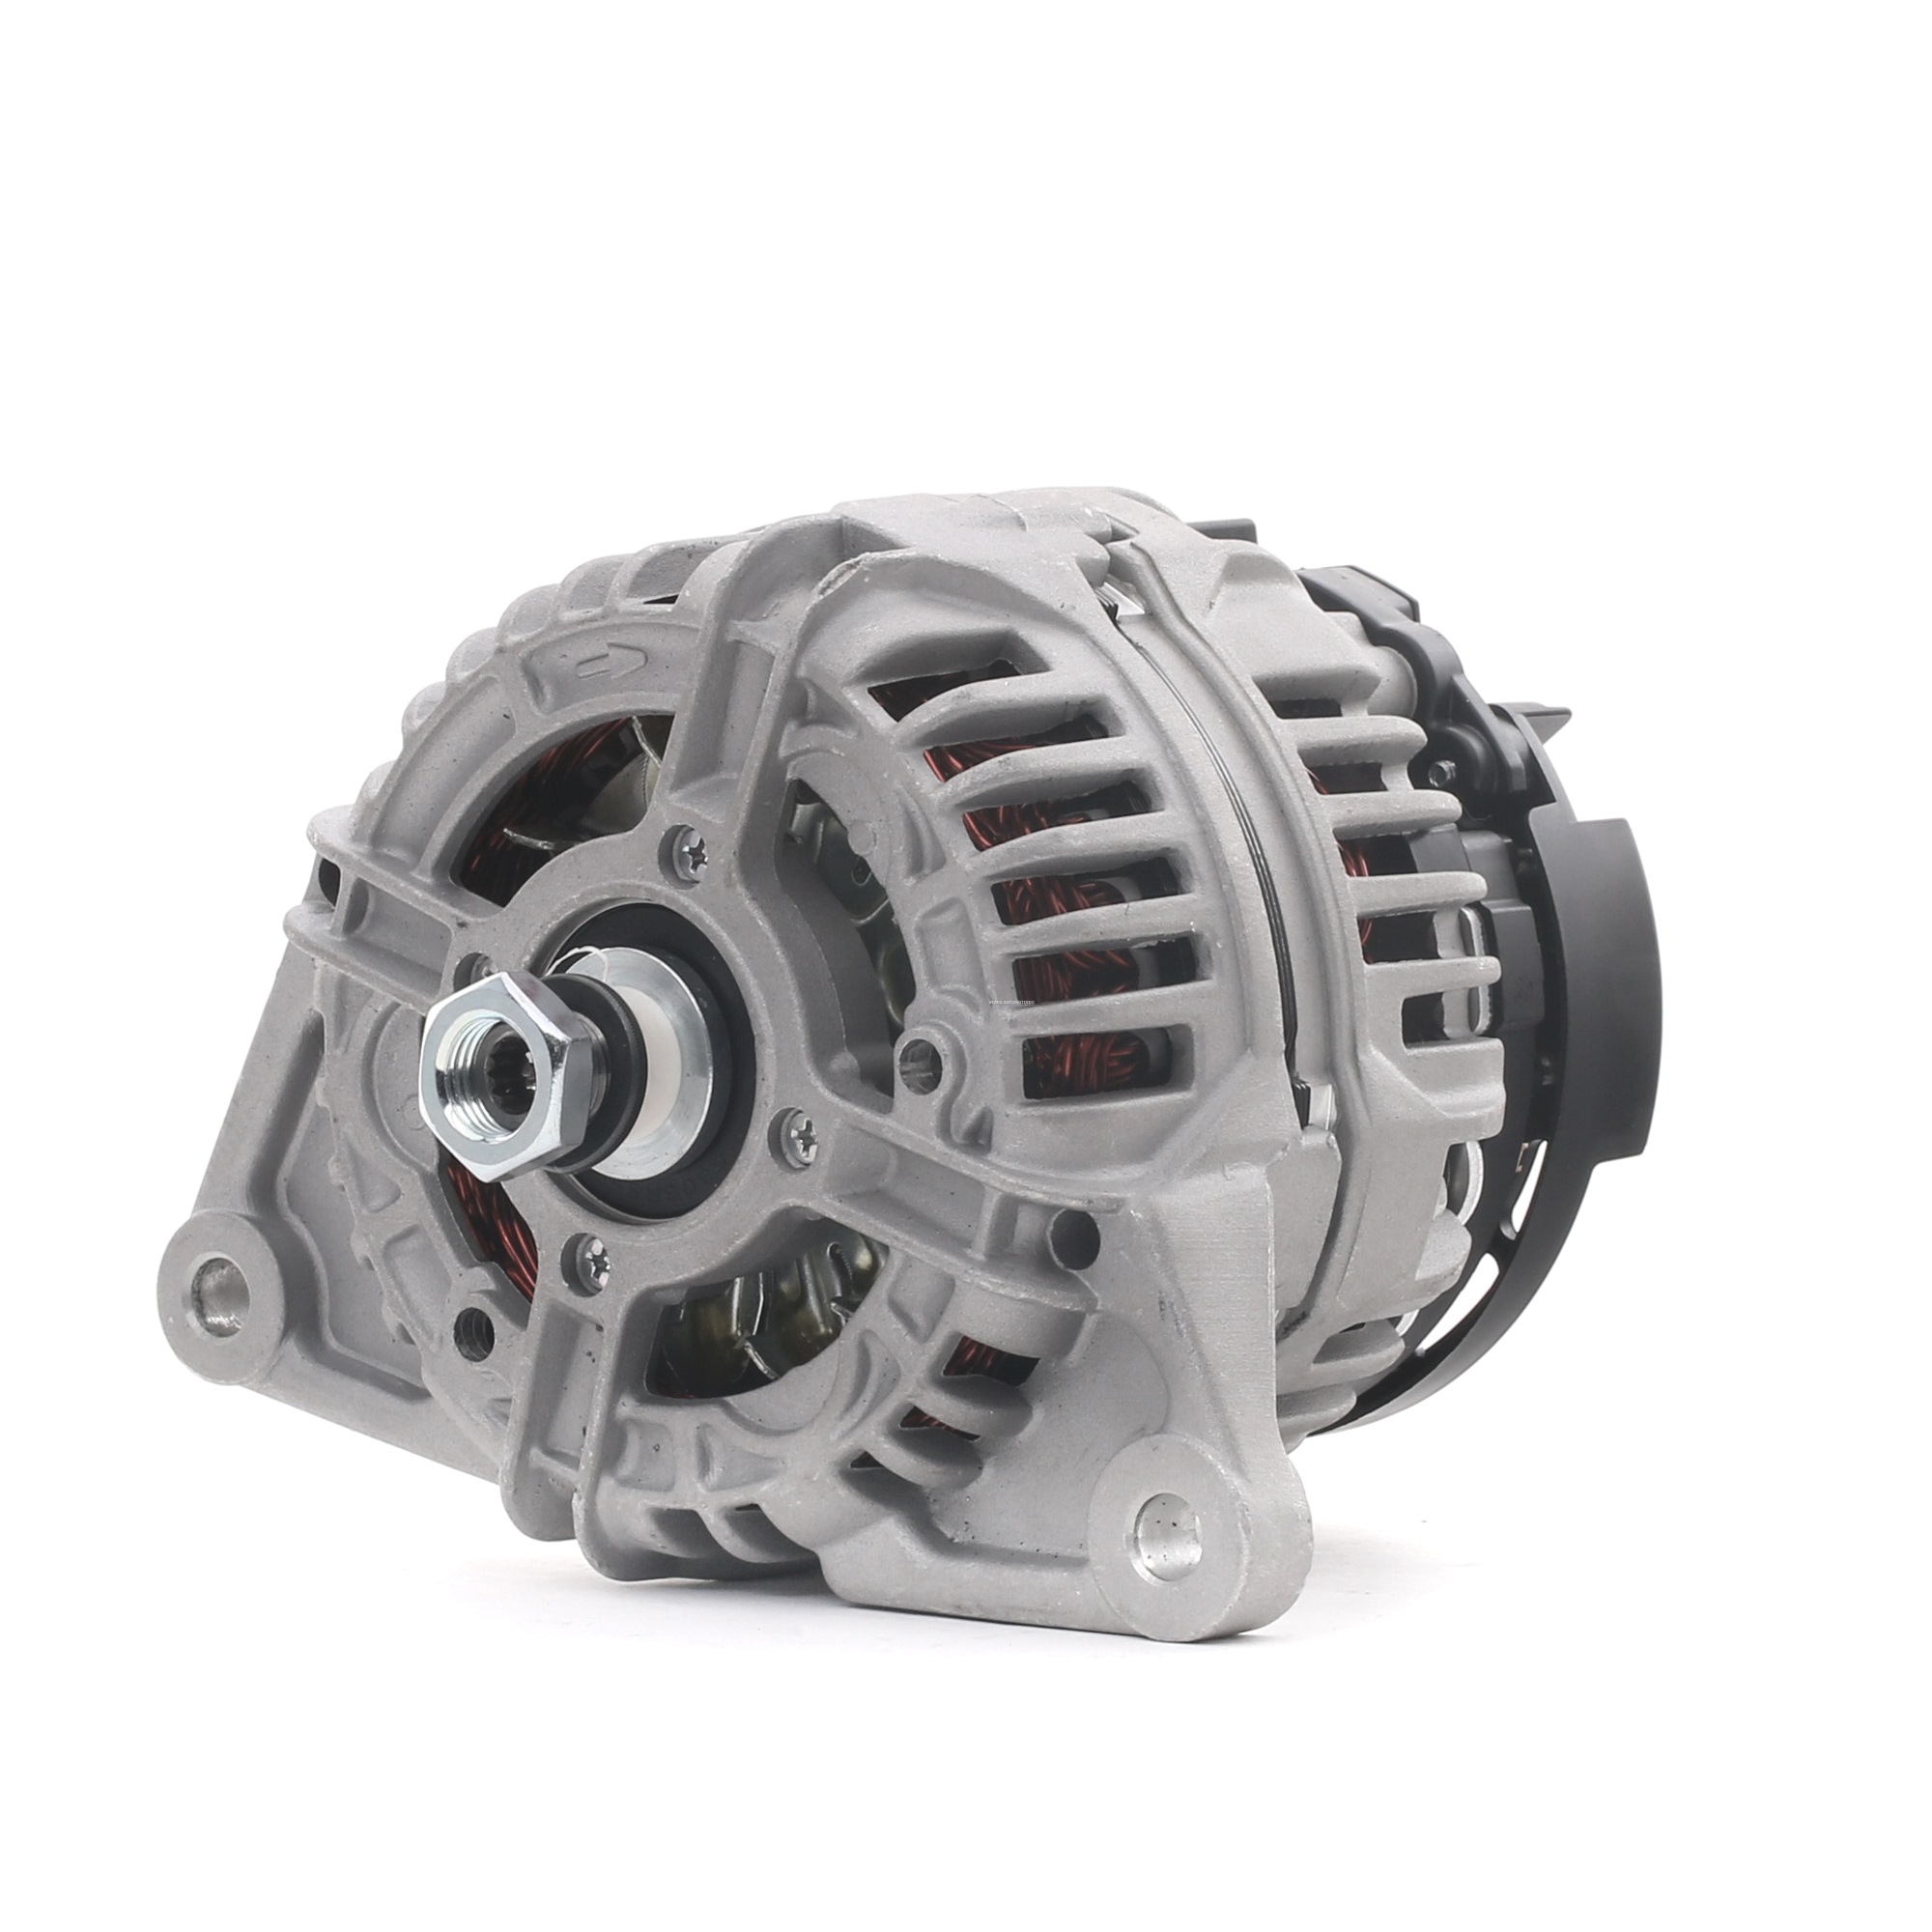 SKGN-0320986 STARK Generator IVECO 12V, 110A, B+(M8),L, B+(M8)/L, B+(M8), L,, excl. vacuum pump, with integrated regulator